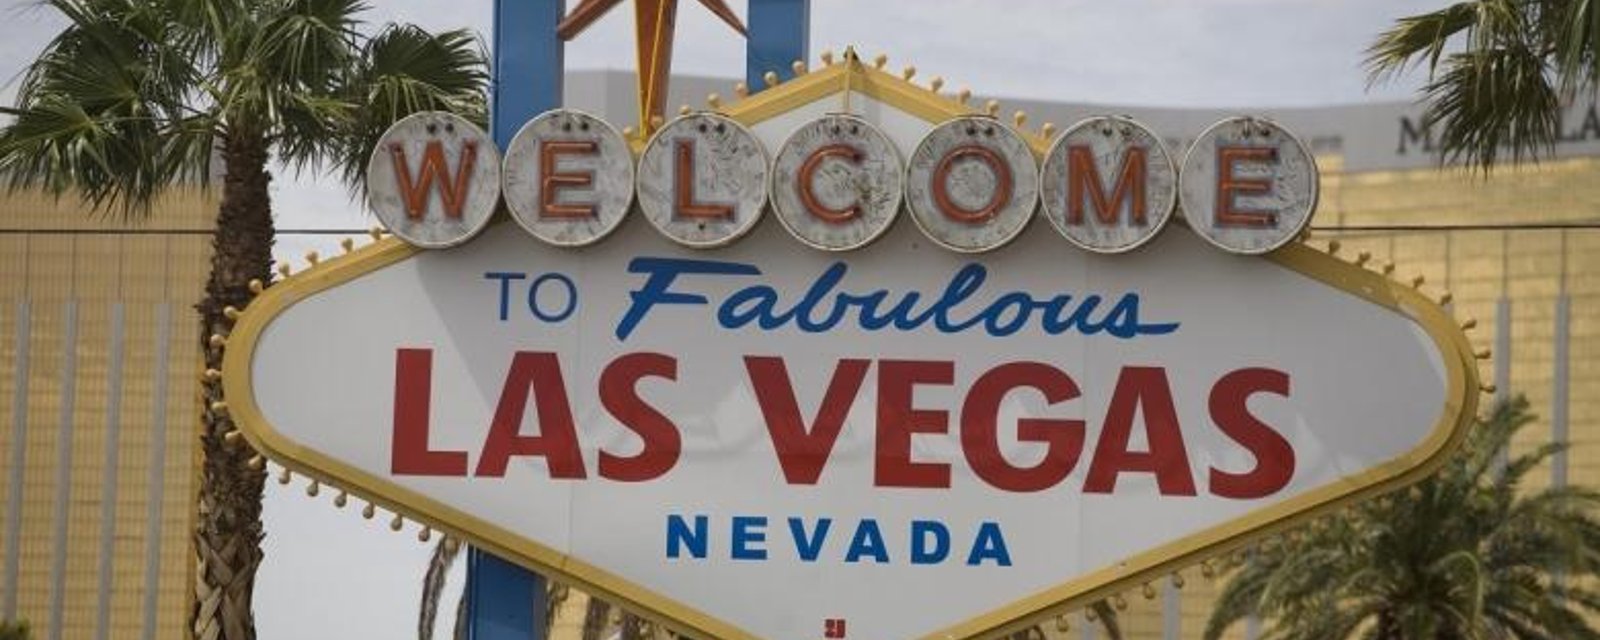 Breaking: The name of the Las Vegas GM has reportedly been leaked.